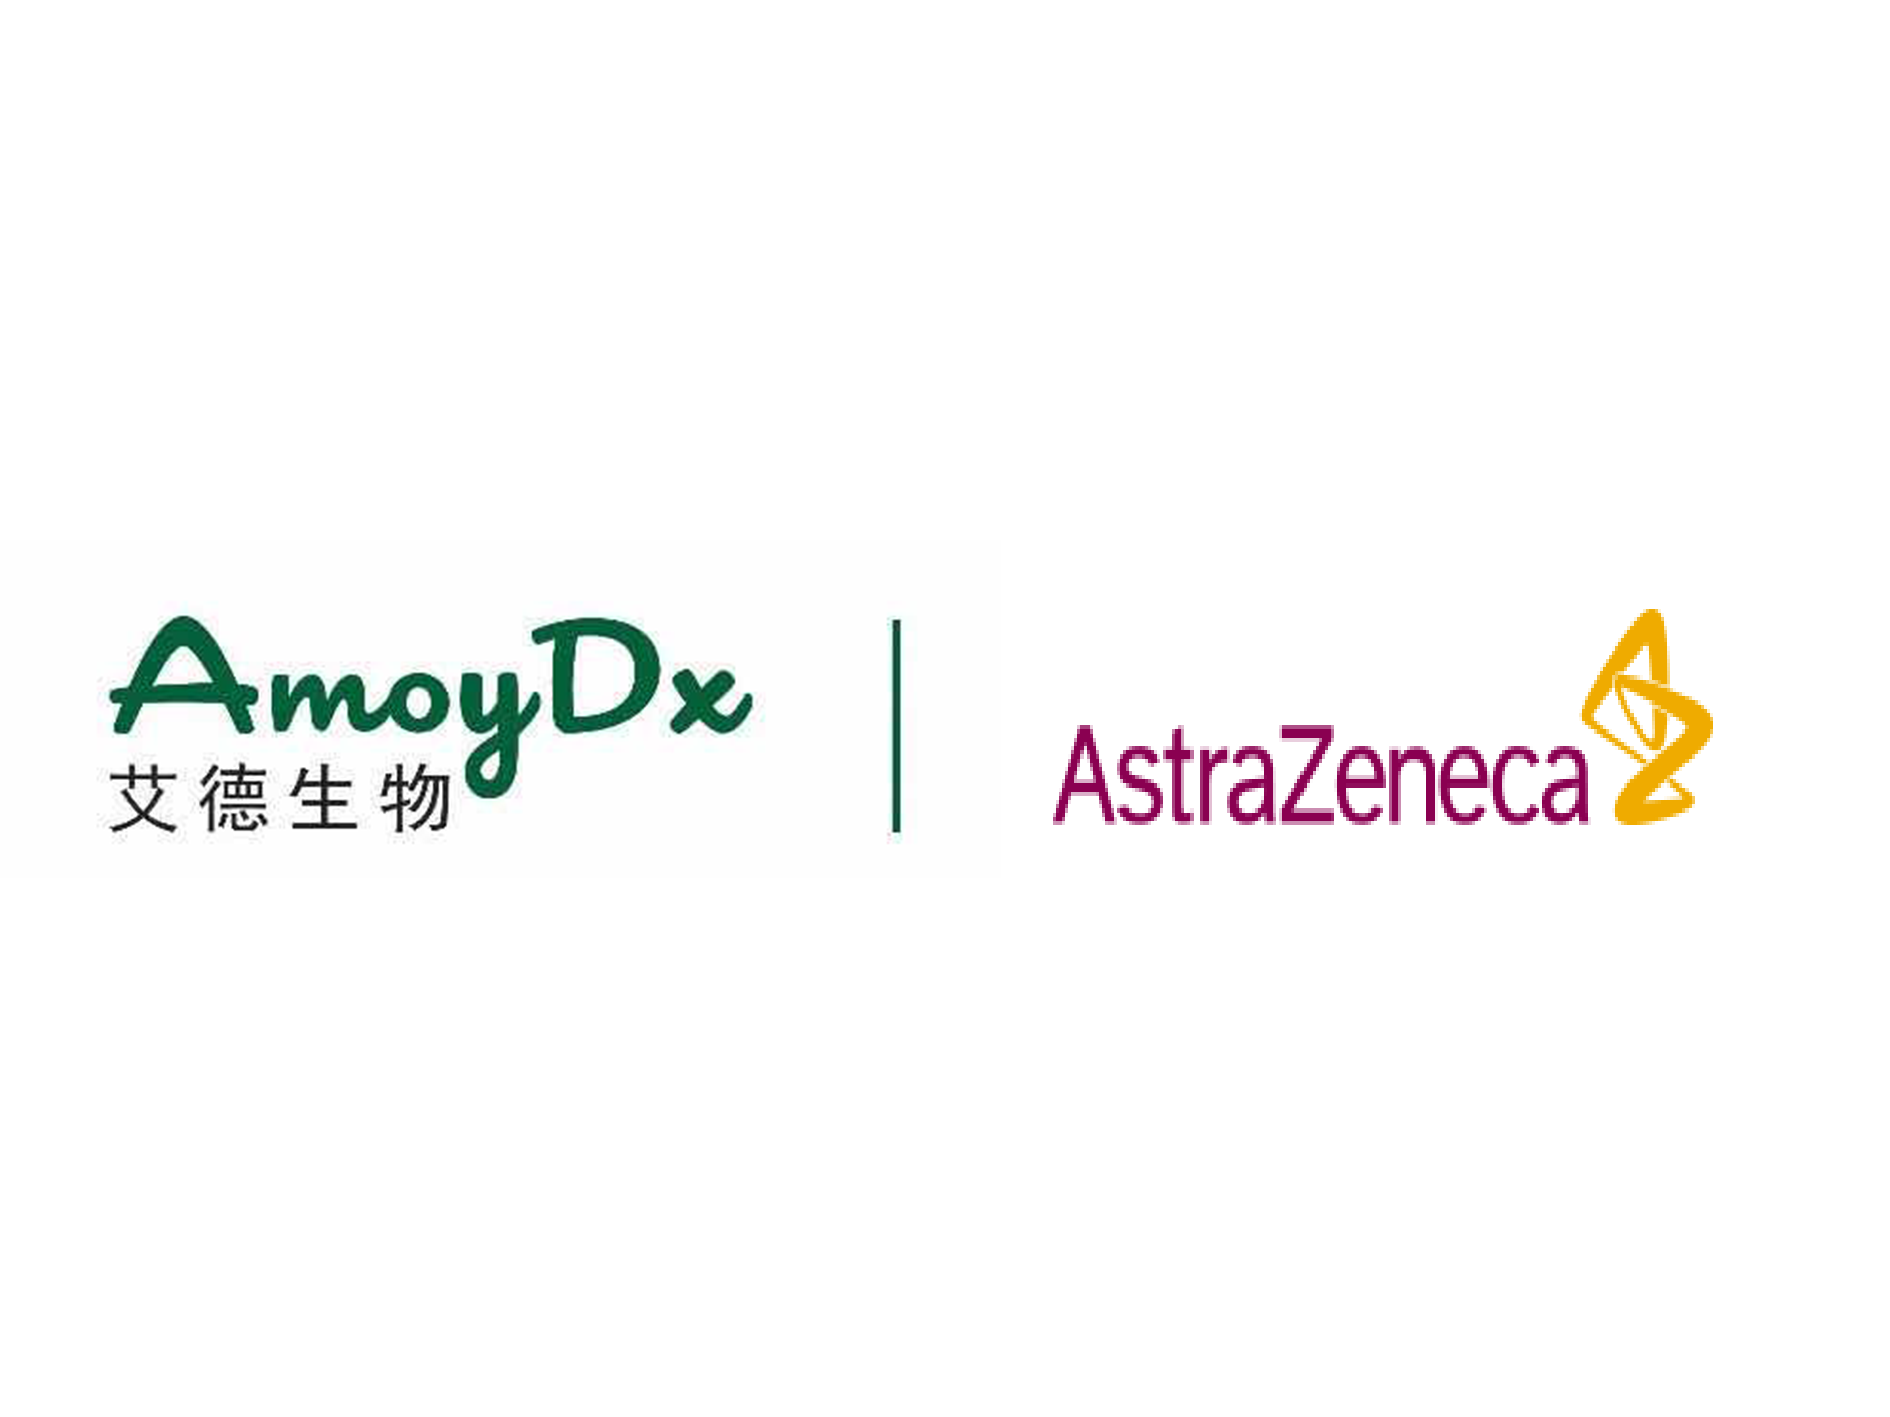 AmoyDx Enters into Master Collaboration Agreement with AstraZeneca for Multiple Companion Diagnostics Programs in China, EU and Japan